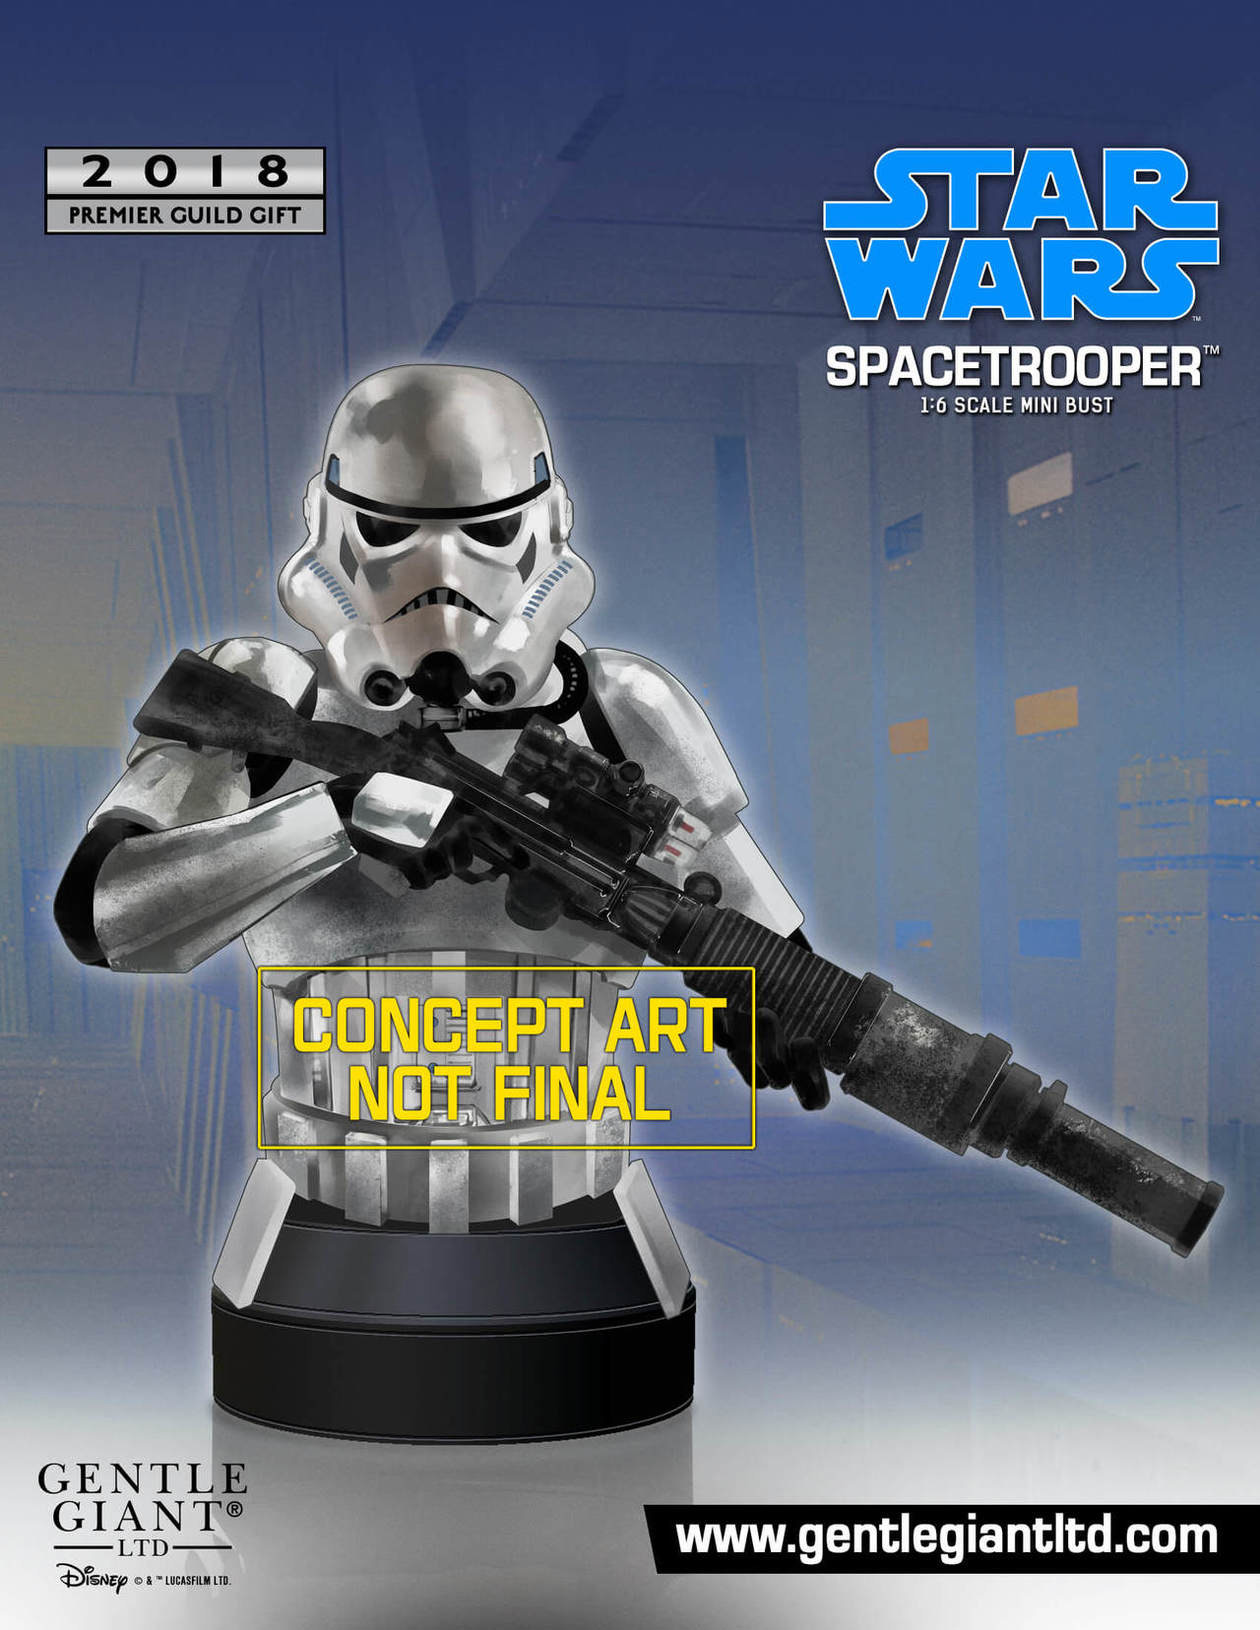 Gentle Giant PGM Gift 2018 space trooper